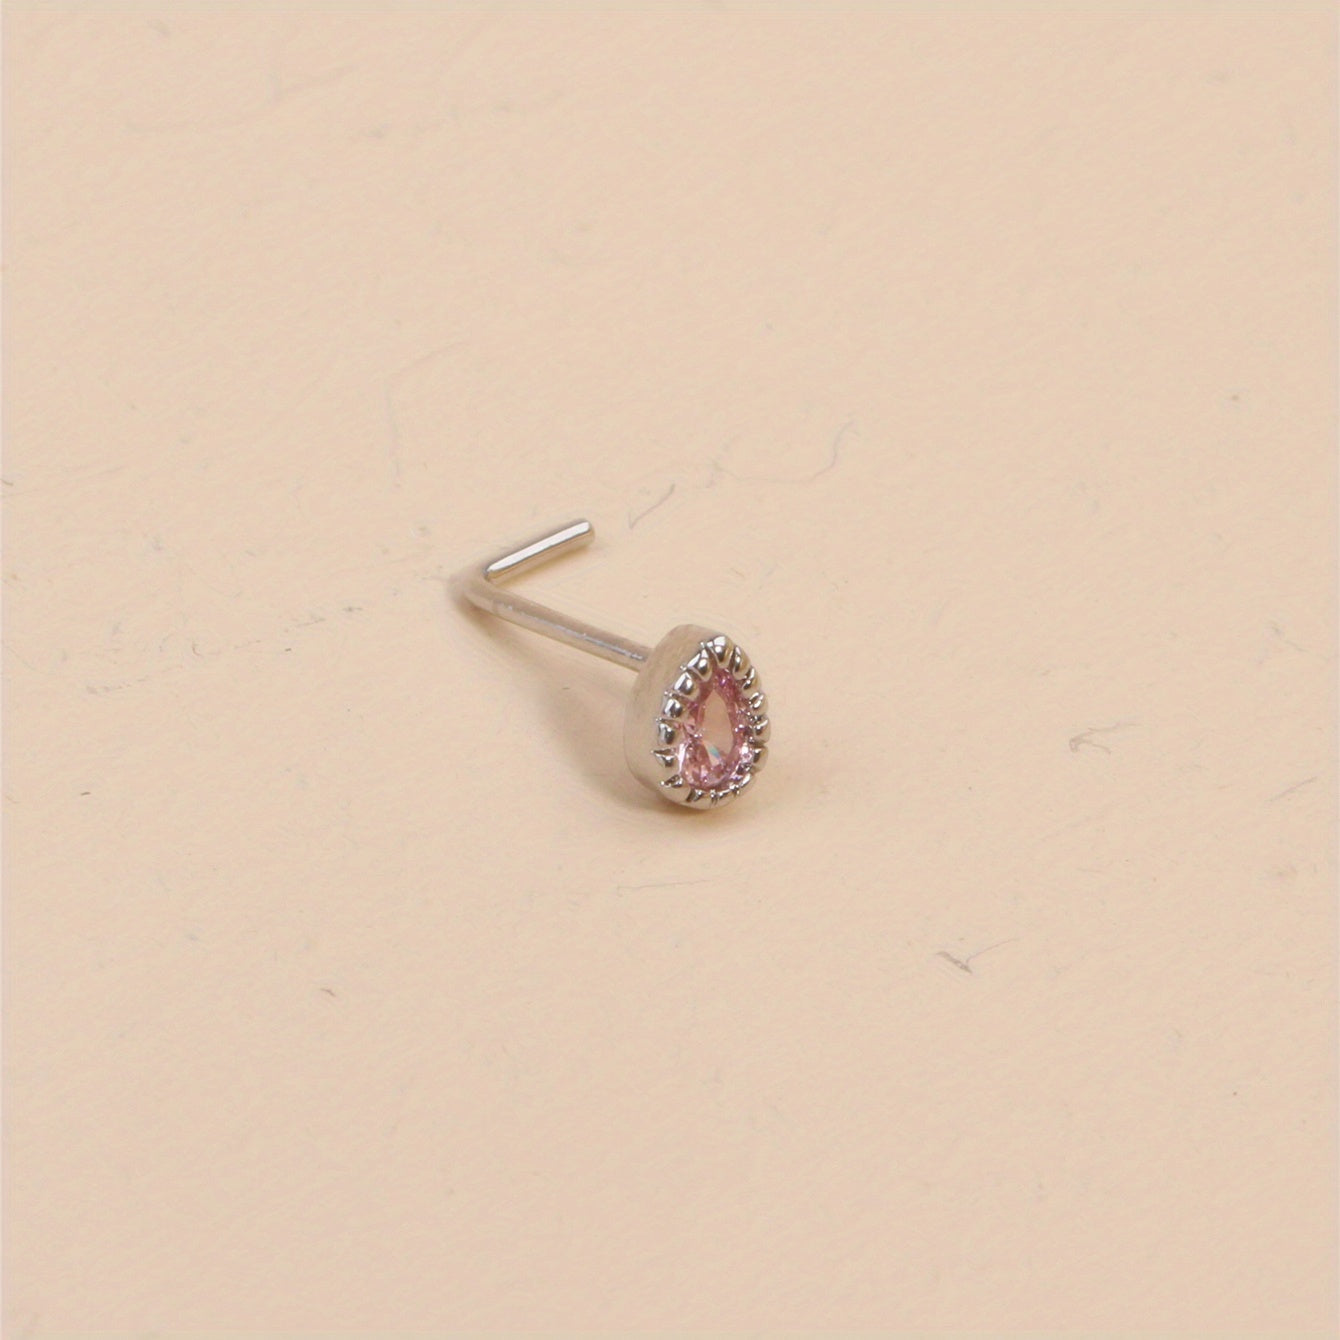 Oval Pink Zircon Inlaid Nose Ring Personality L Shaped Nose Studs Women Body Piercing Jewelry